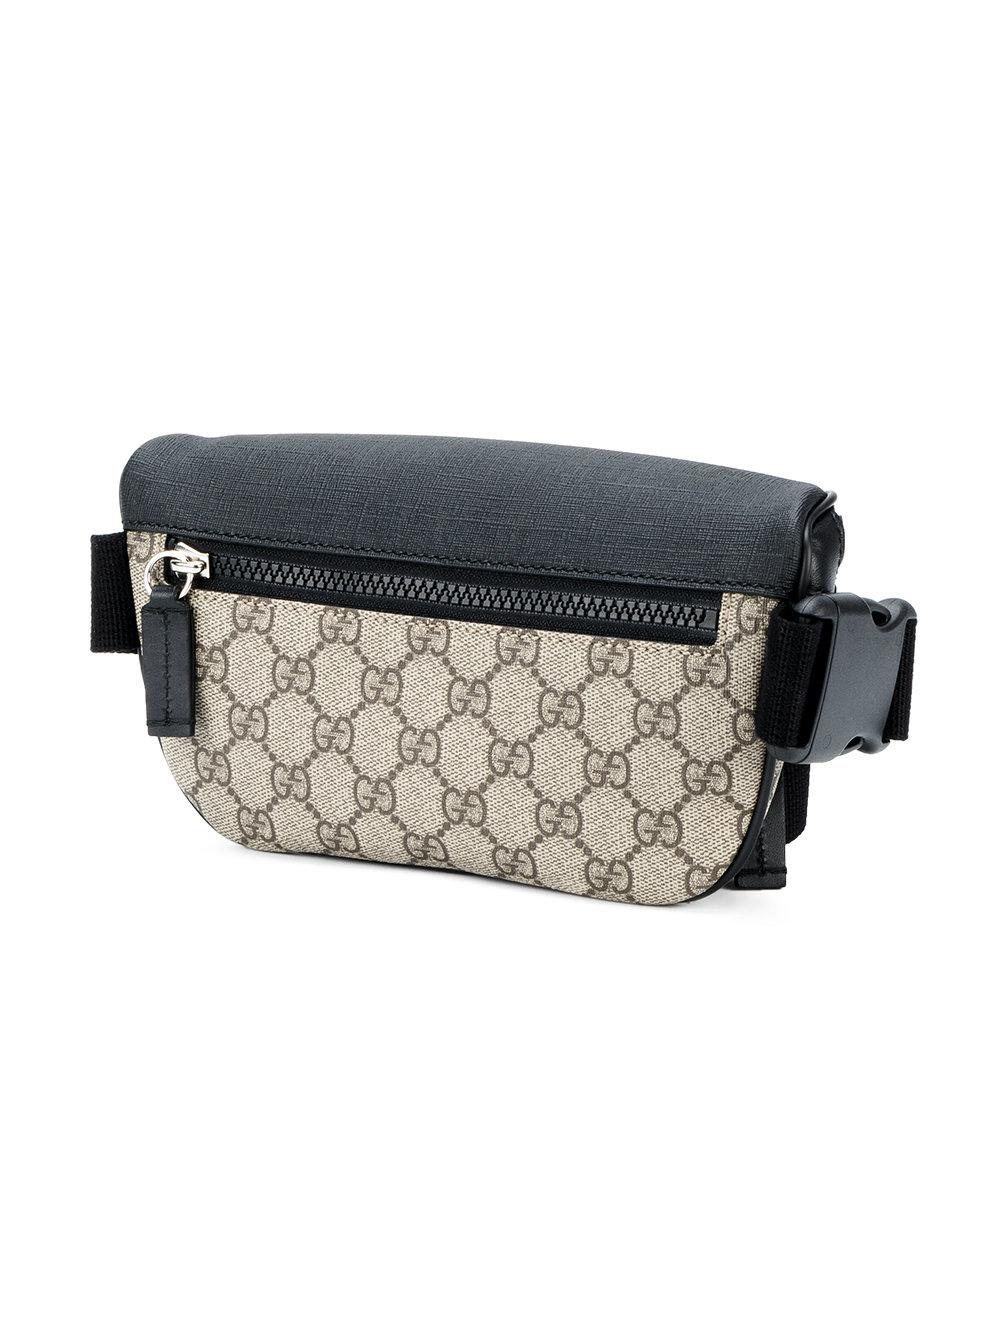 Gucci Canvas Gg Supreme Cross-body Bag in Brown for Men - Lyst